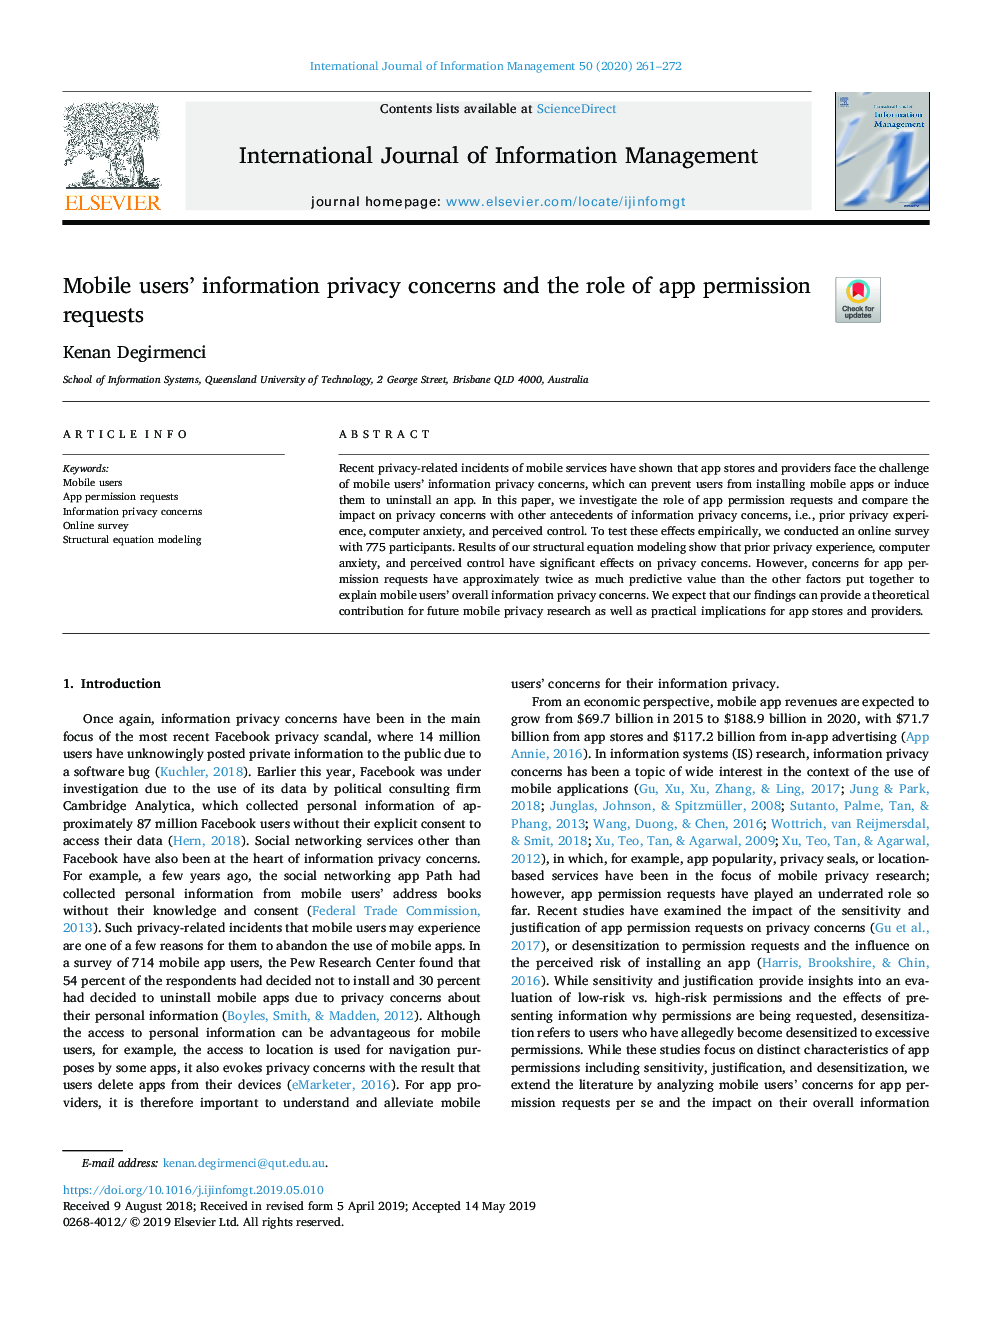 Mobile users' information privacy concerns and the role of app permission requests